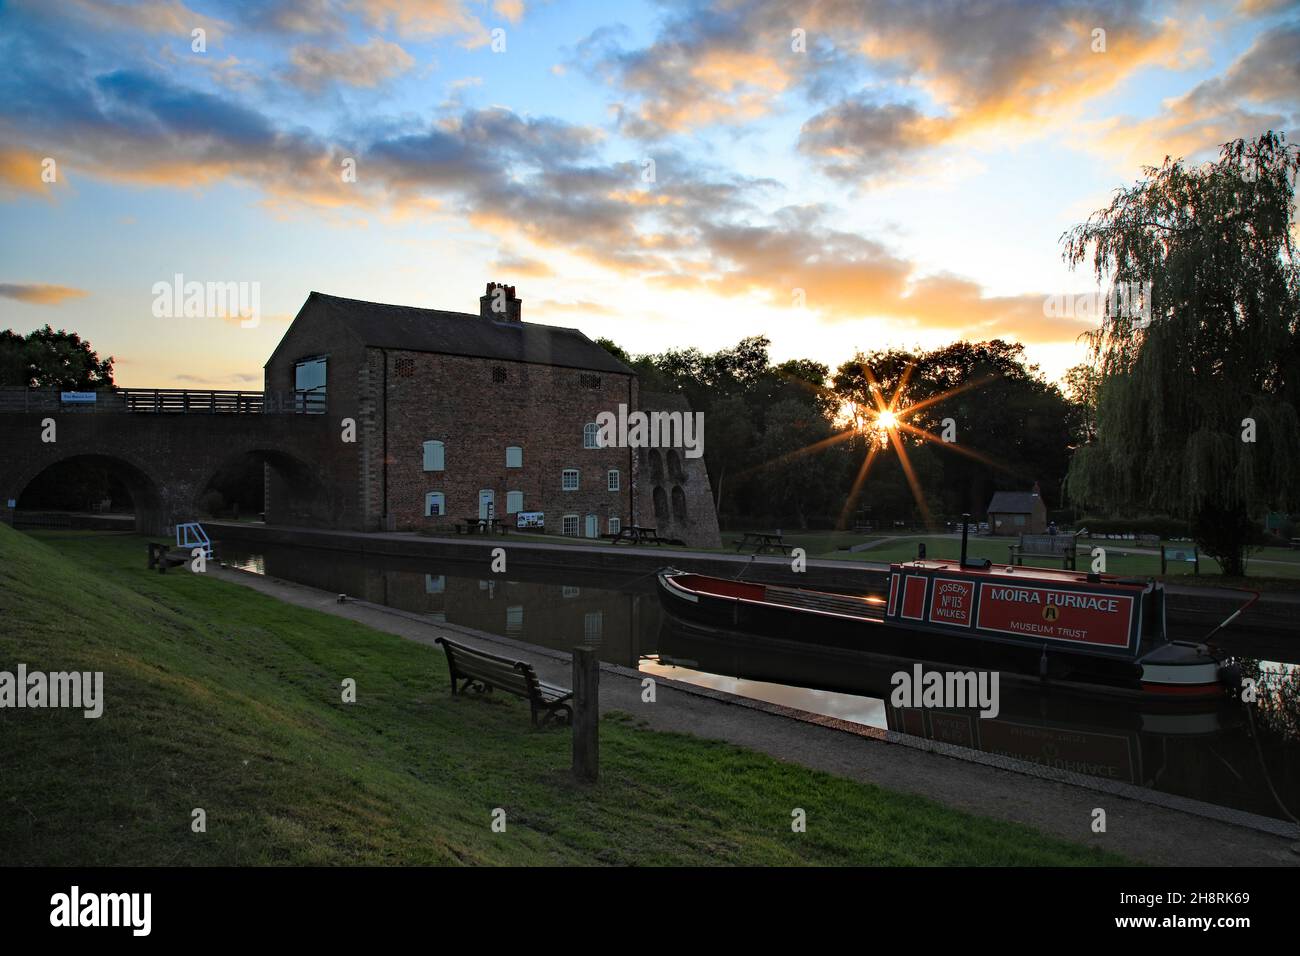 Sonnenuntergang Am Moira Furnace, North West Leicestershire Stockfoto